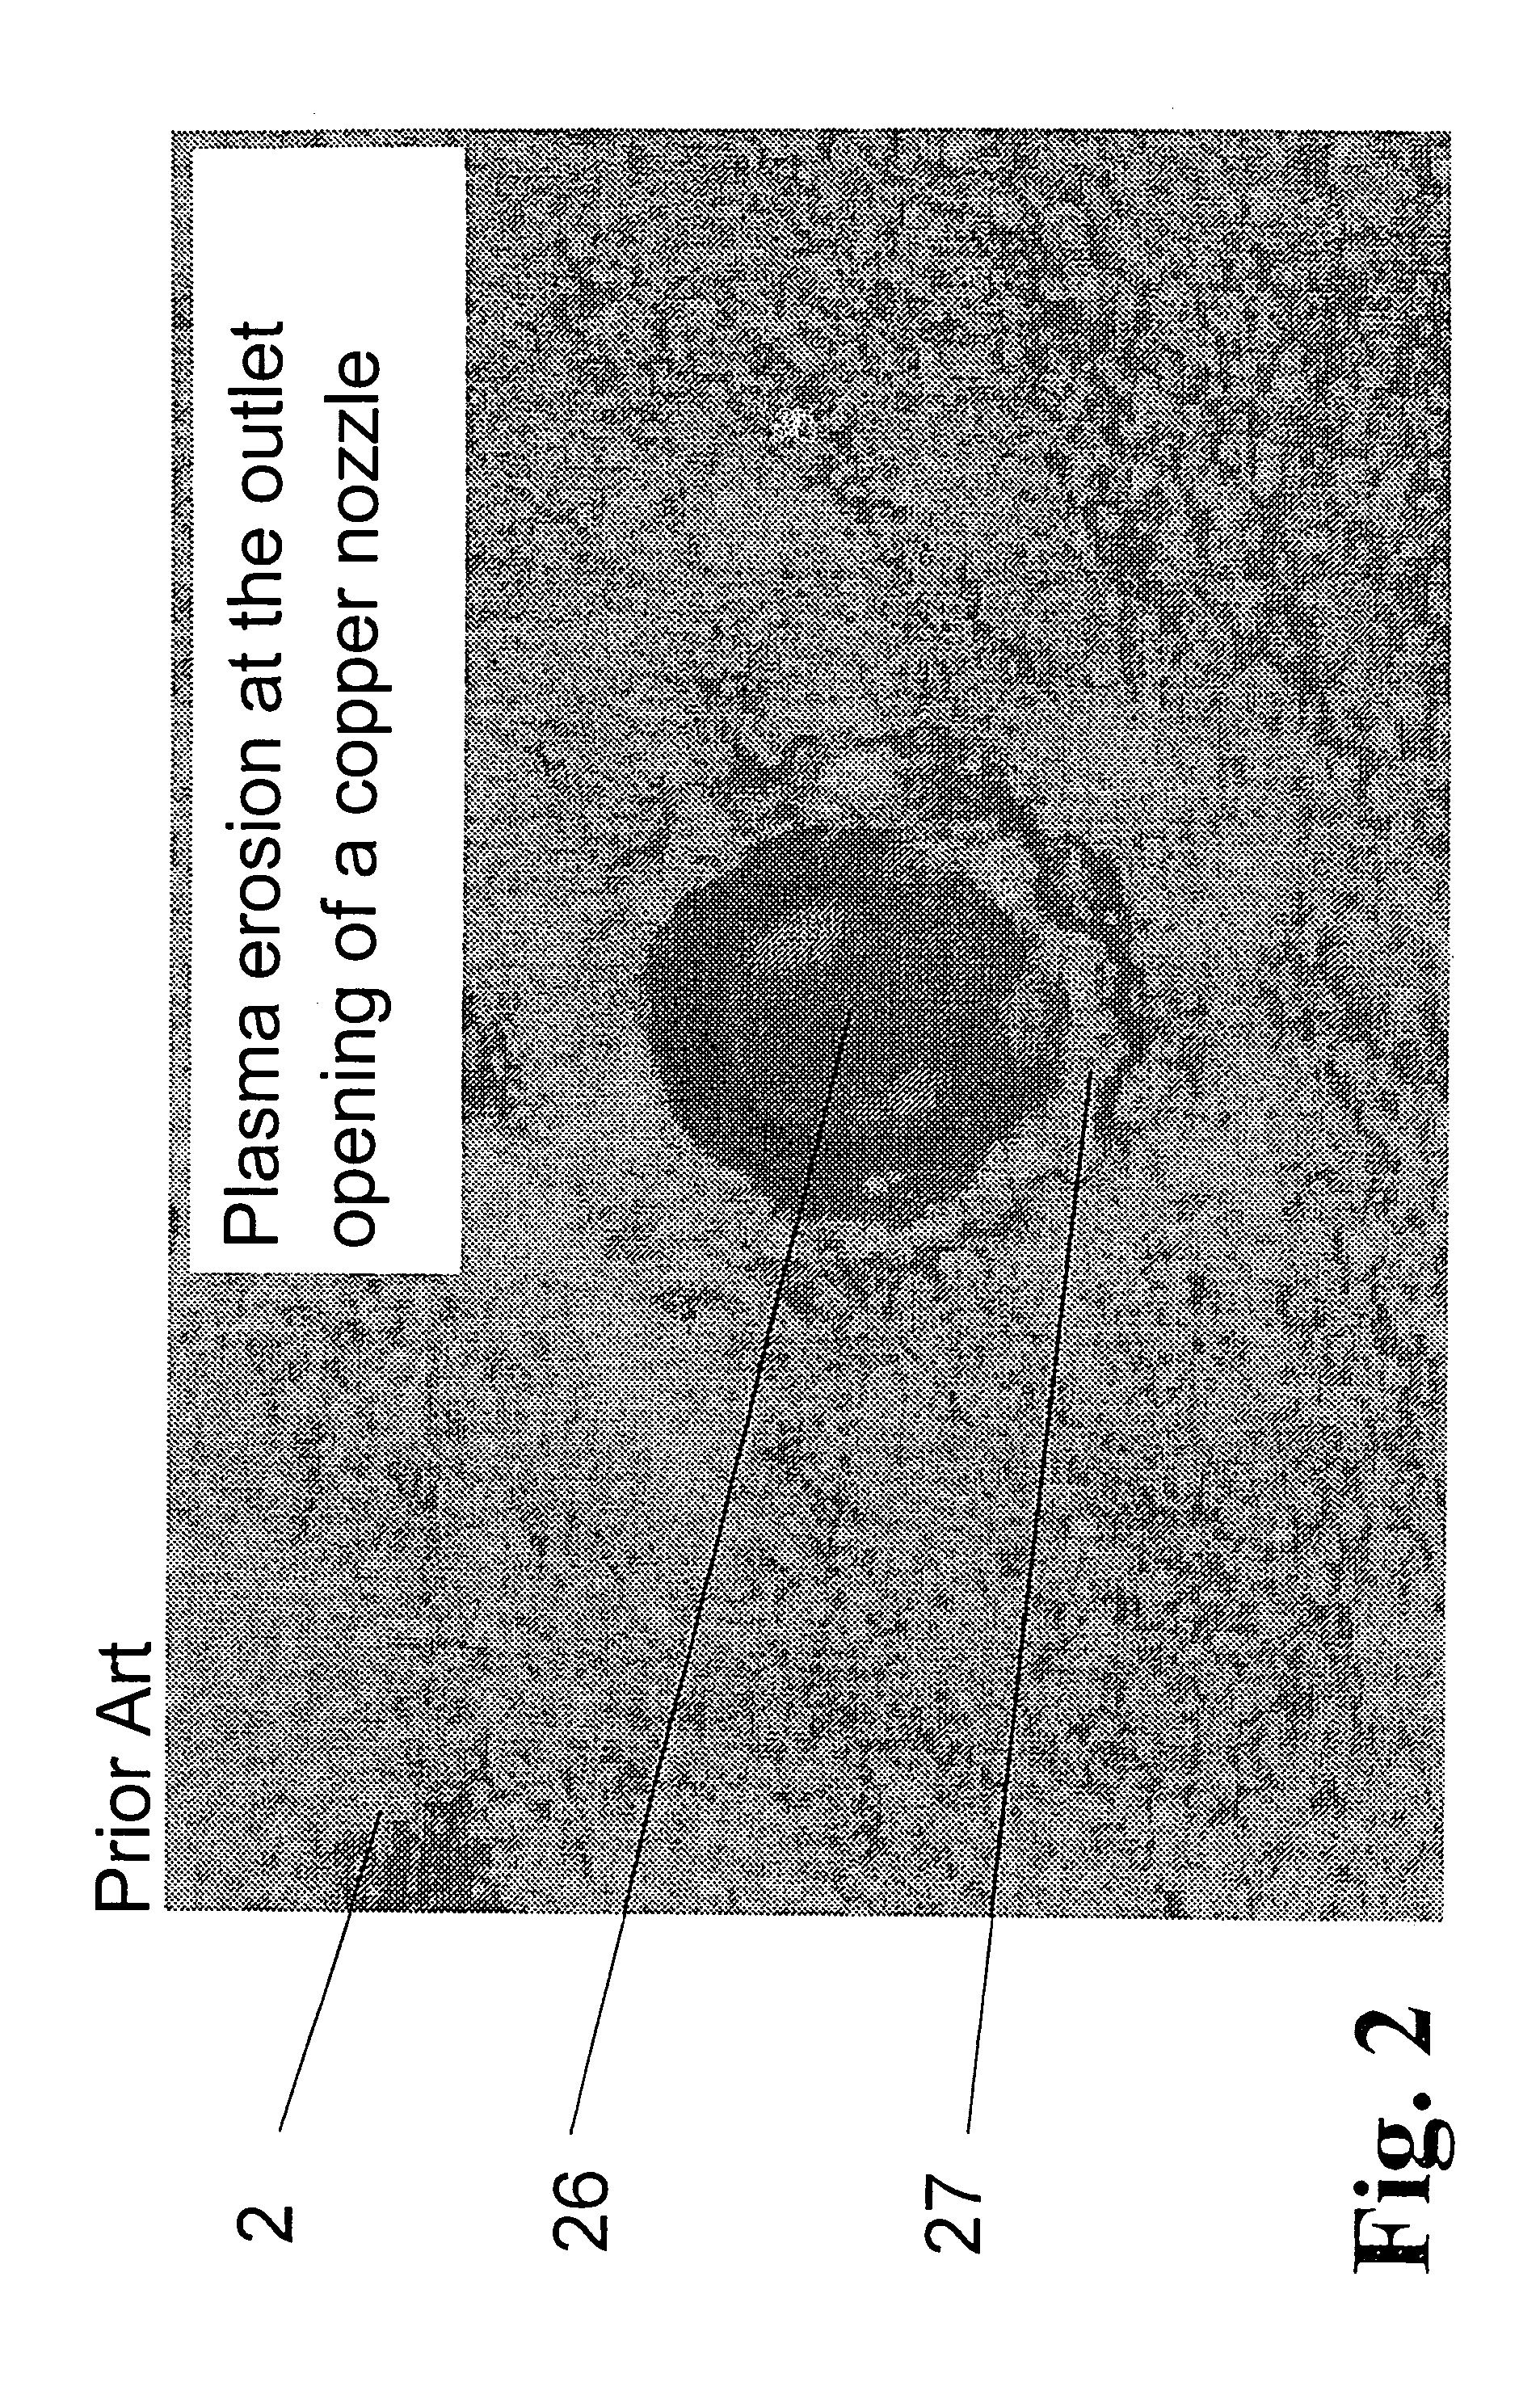 Arrangement for providing a reproducible target flow for the energy beam-induced generation of short-wavelength electromagnetic radiation